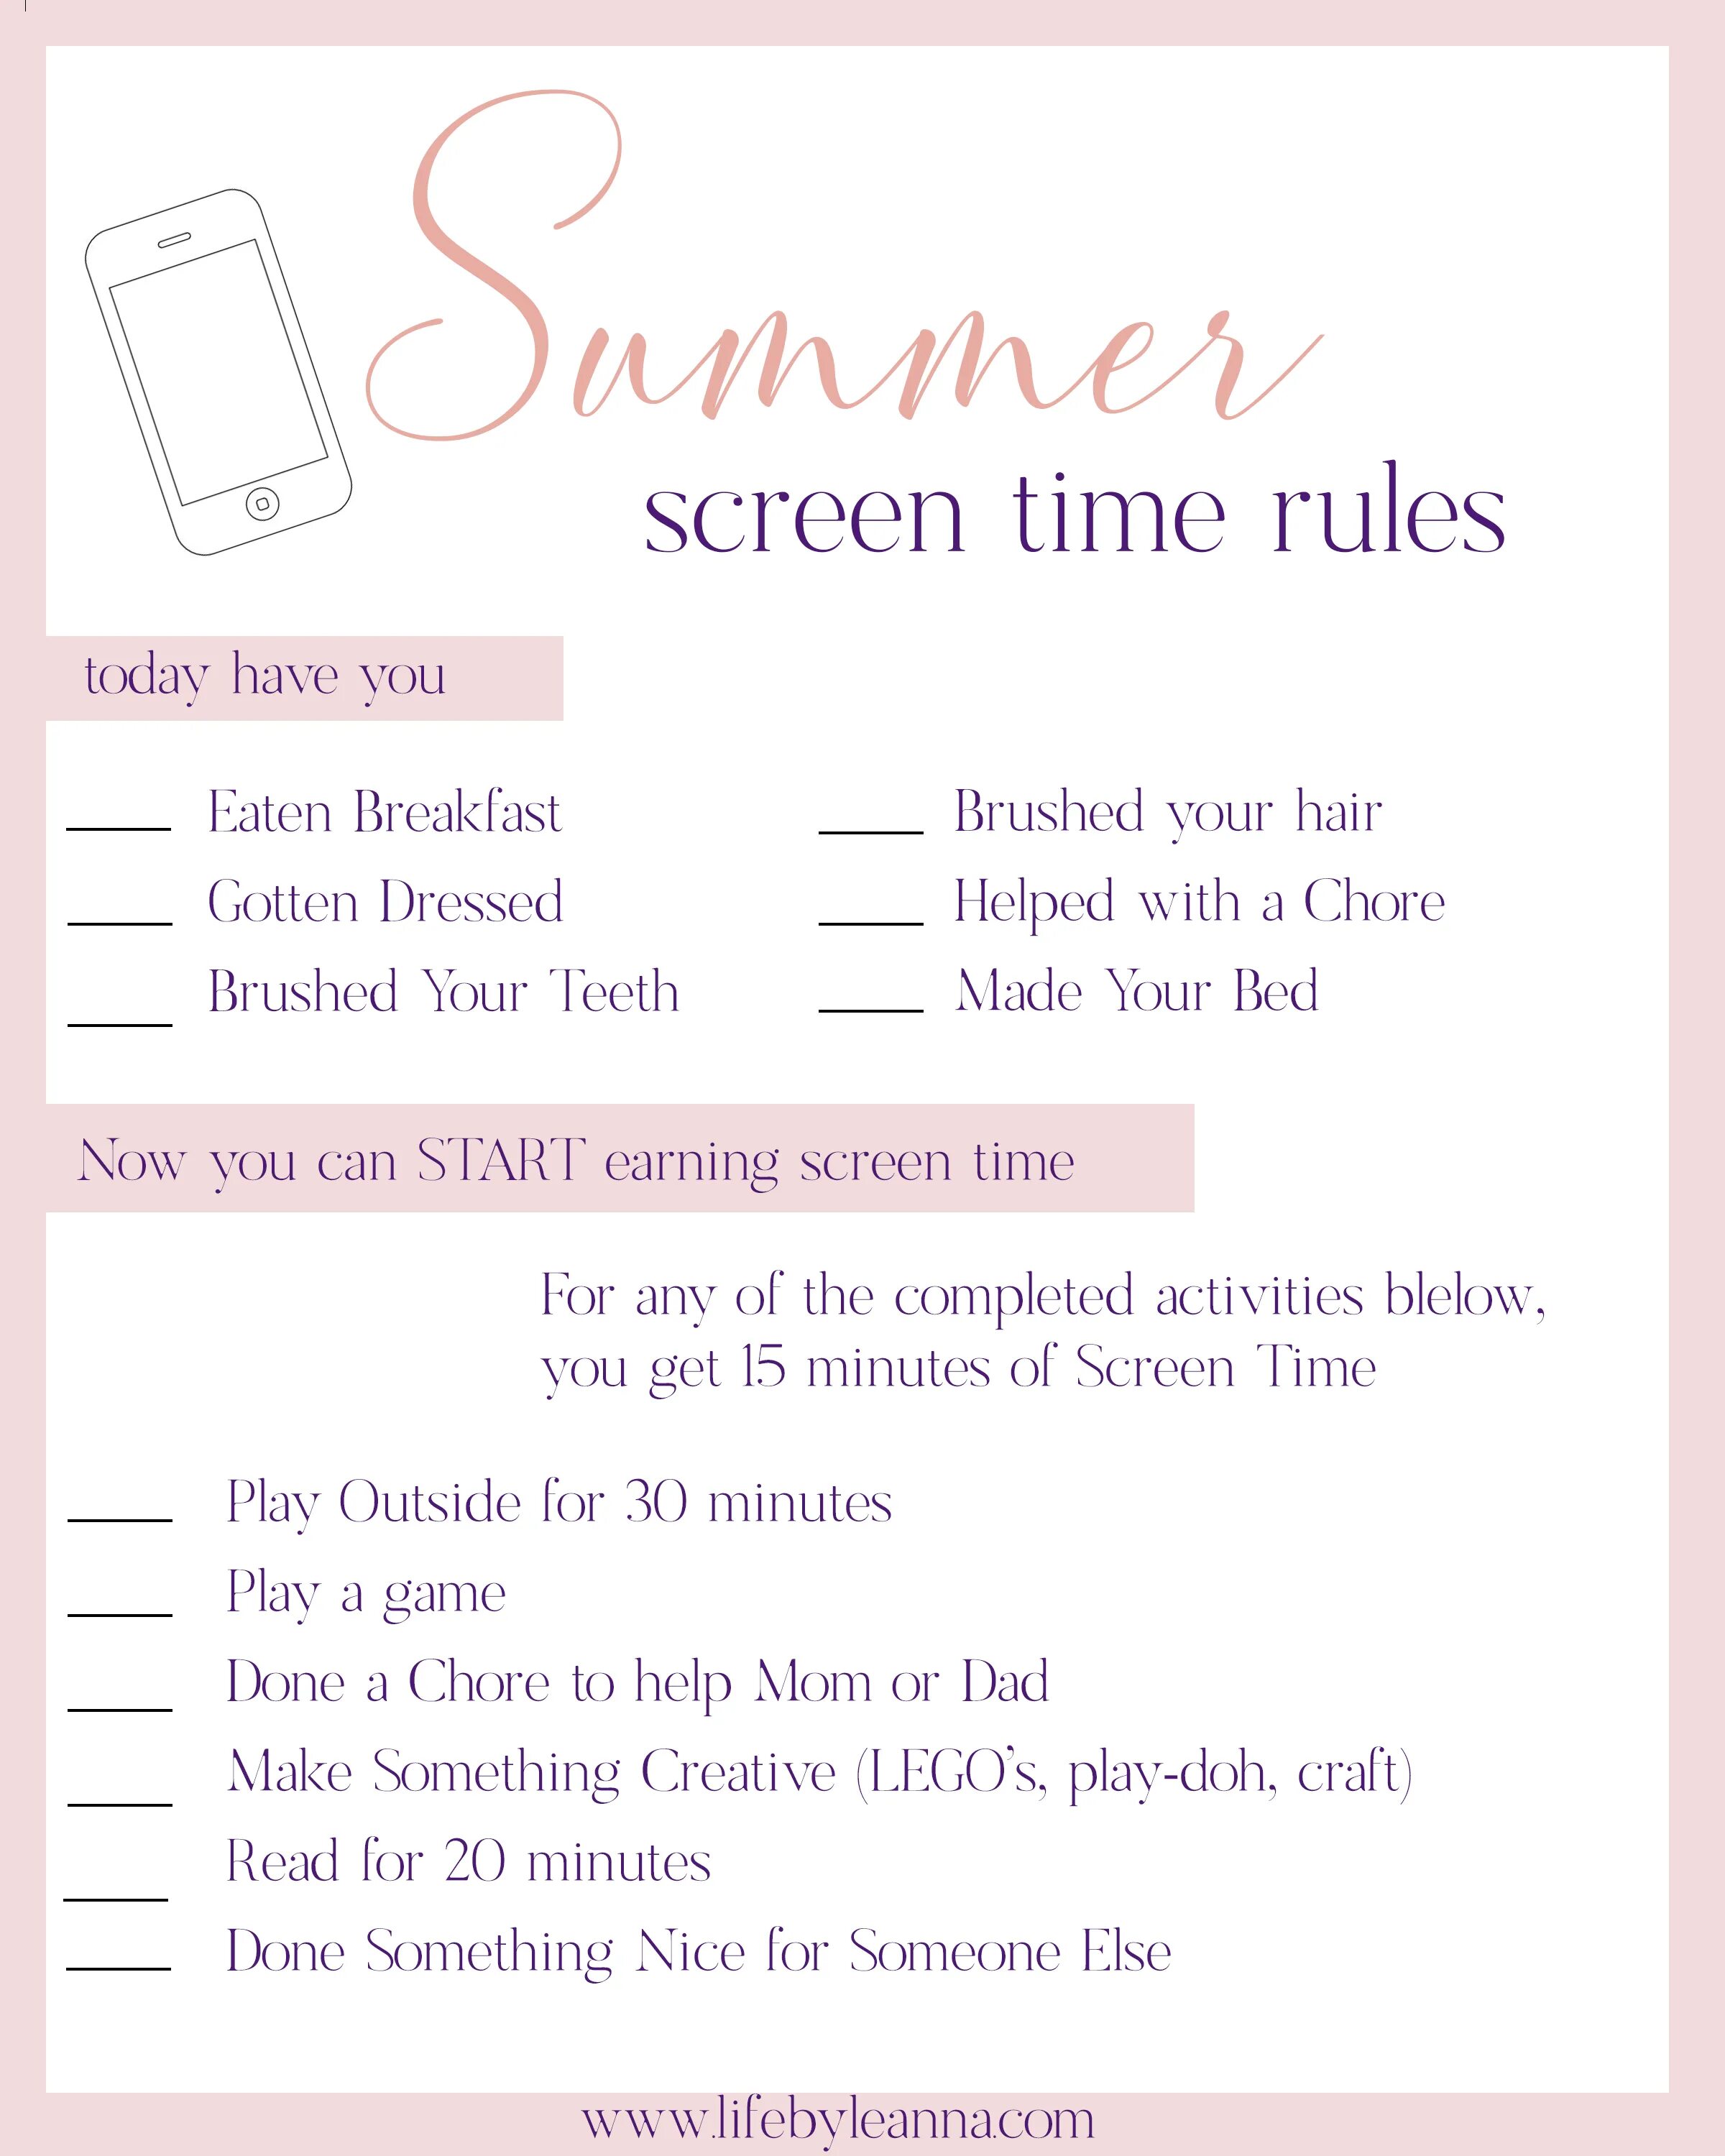 Life checklist. Life Checklist на русском языке. Time Rule for Kids. Summer Rules.